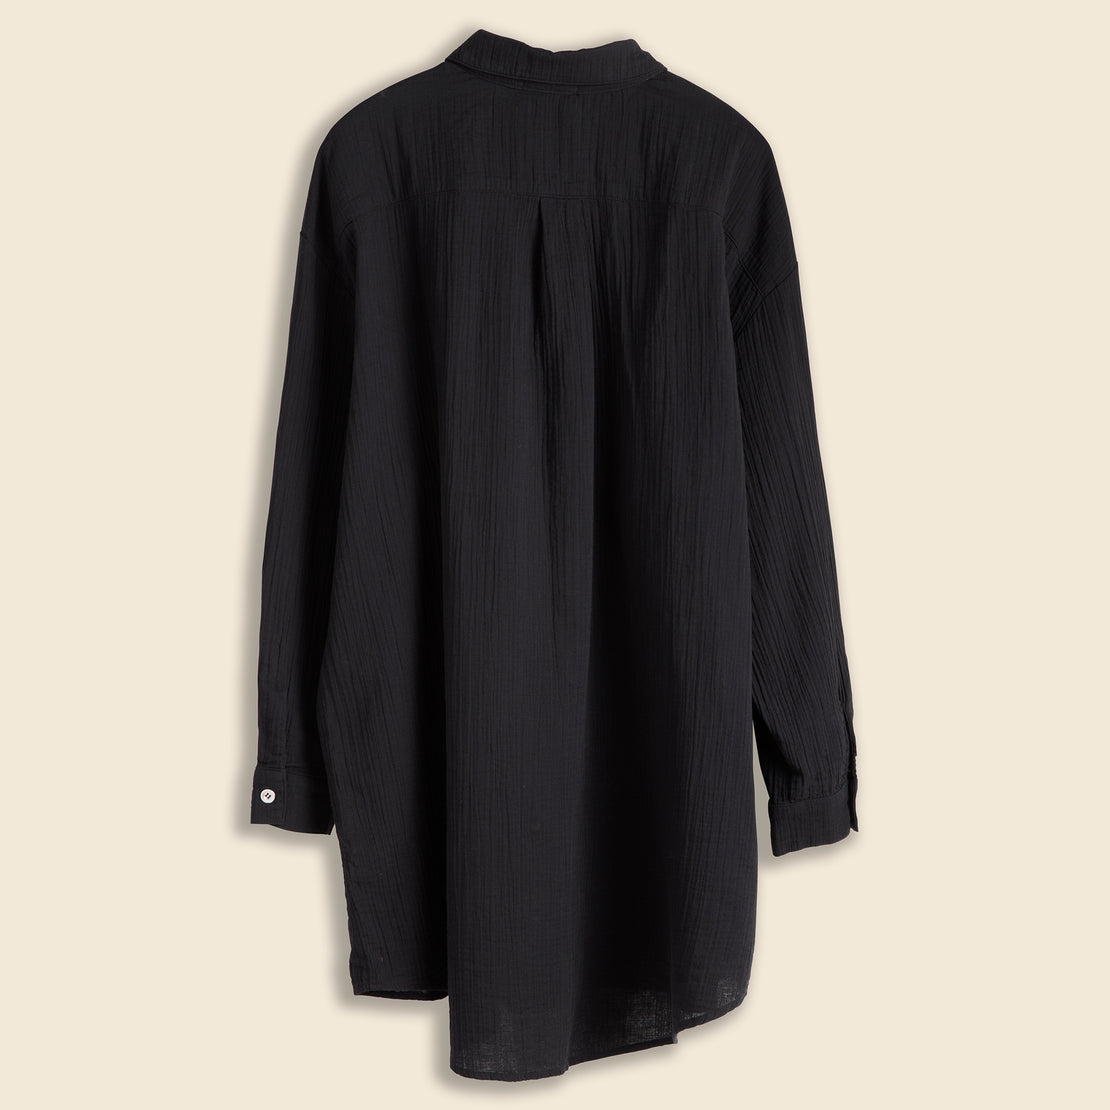 Oversized Overlay Gauze Shirt - Black - Atelier Delphine - STAG Provisions - W - Tops - L/S Woven